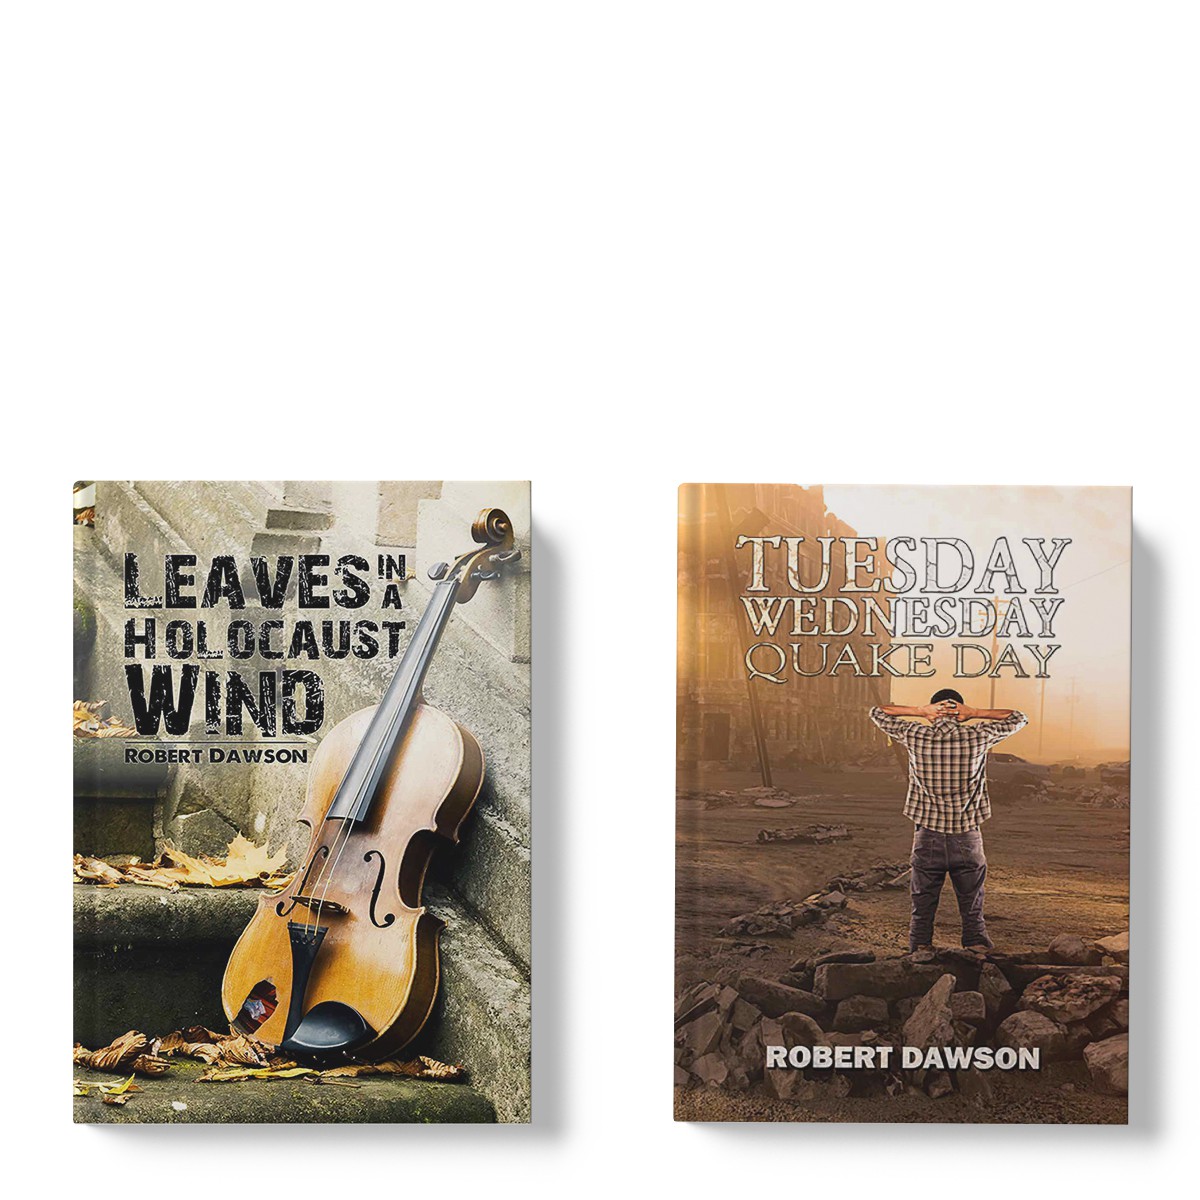 Acclaimed Author Robert Dawson Got a Splendid Review for His Brilliant Books